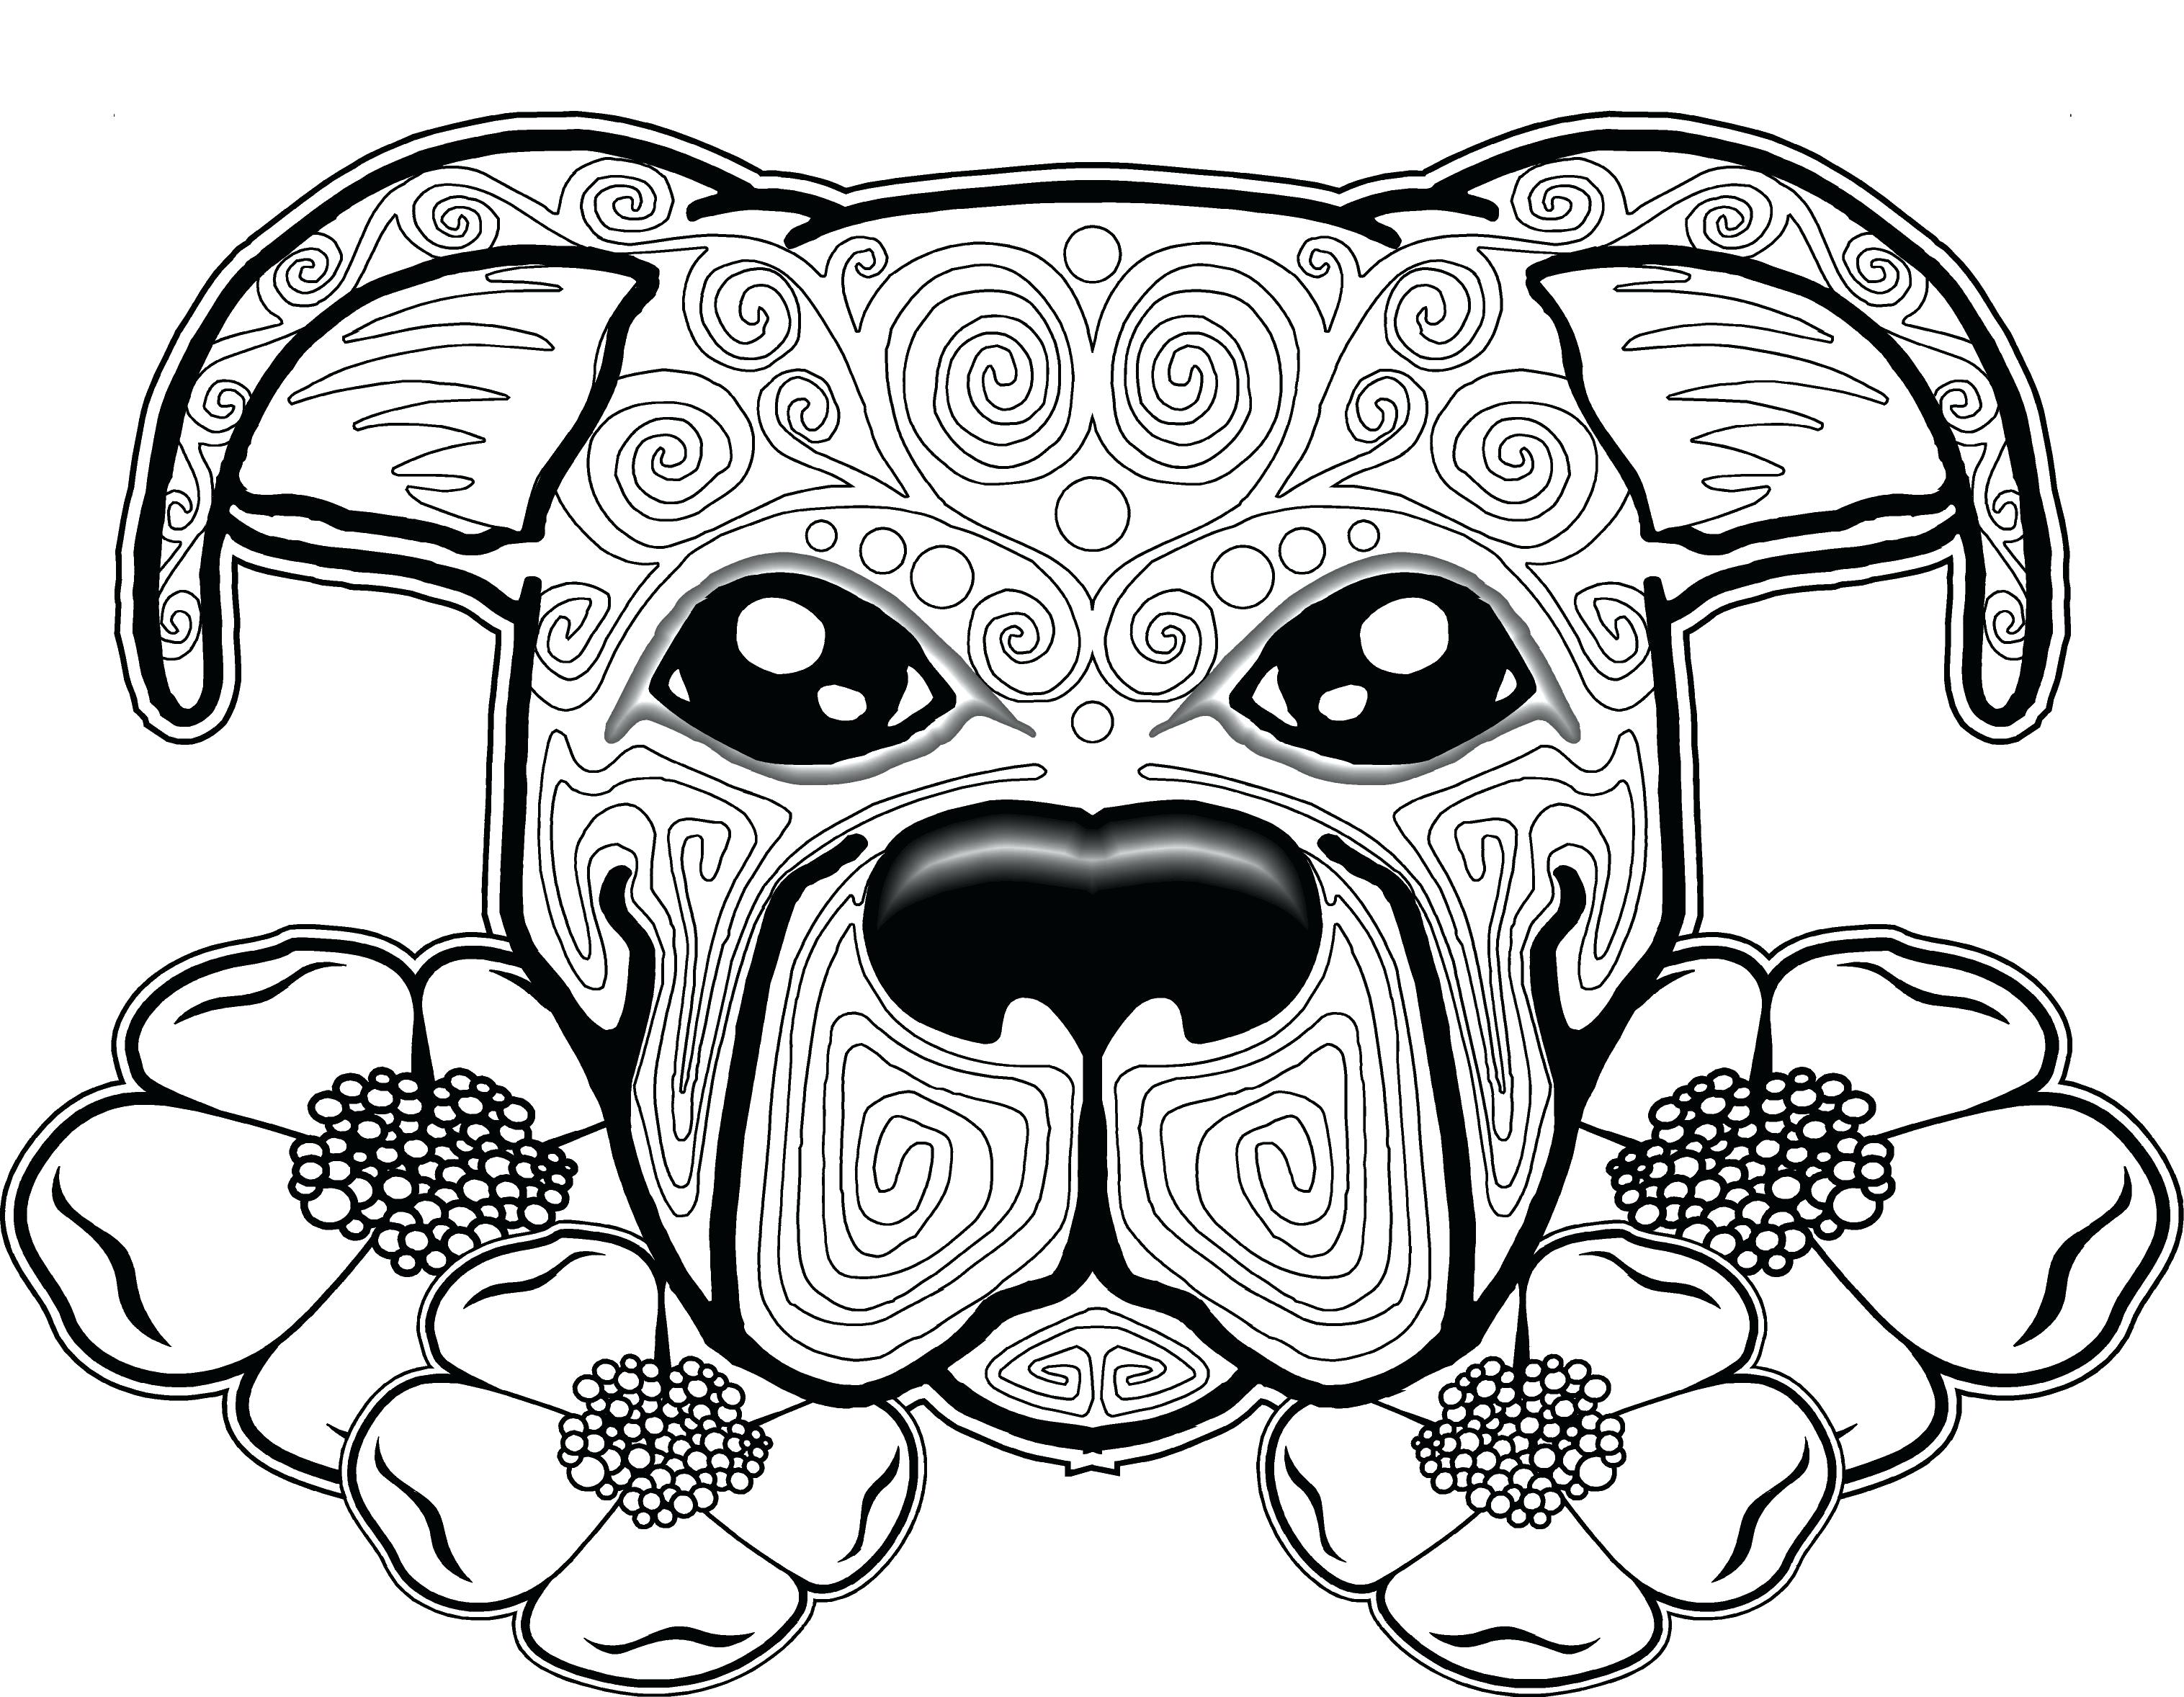 pit-bull-adult-coloring-pages-coloring-pages